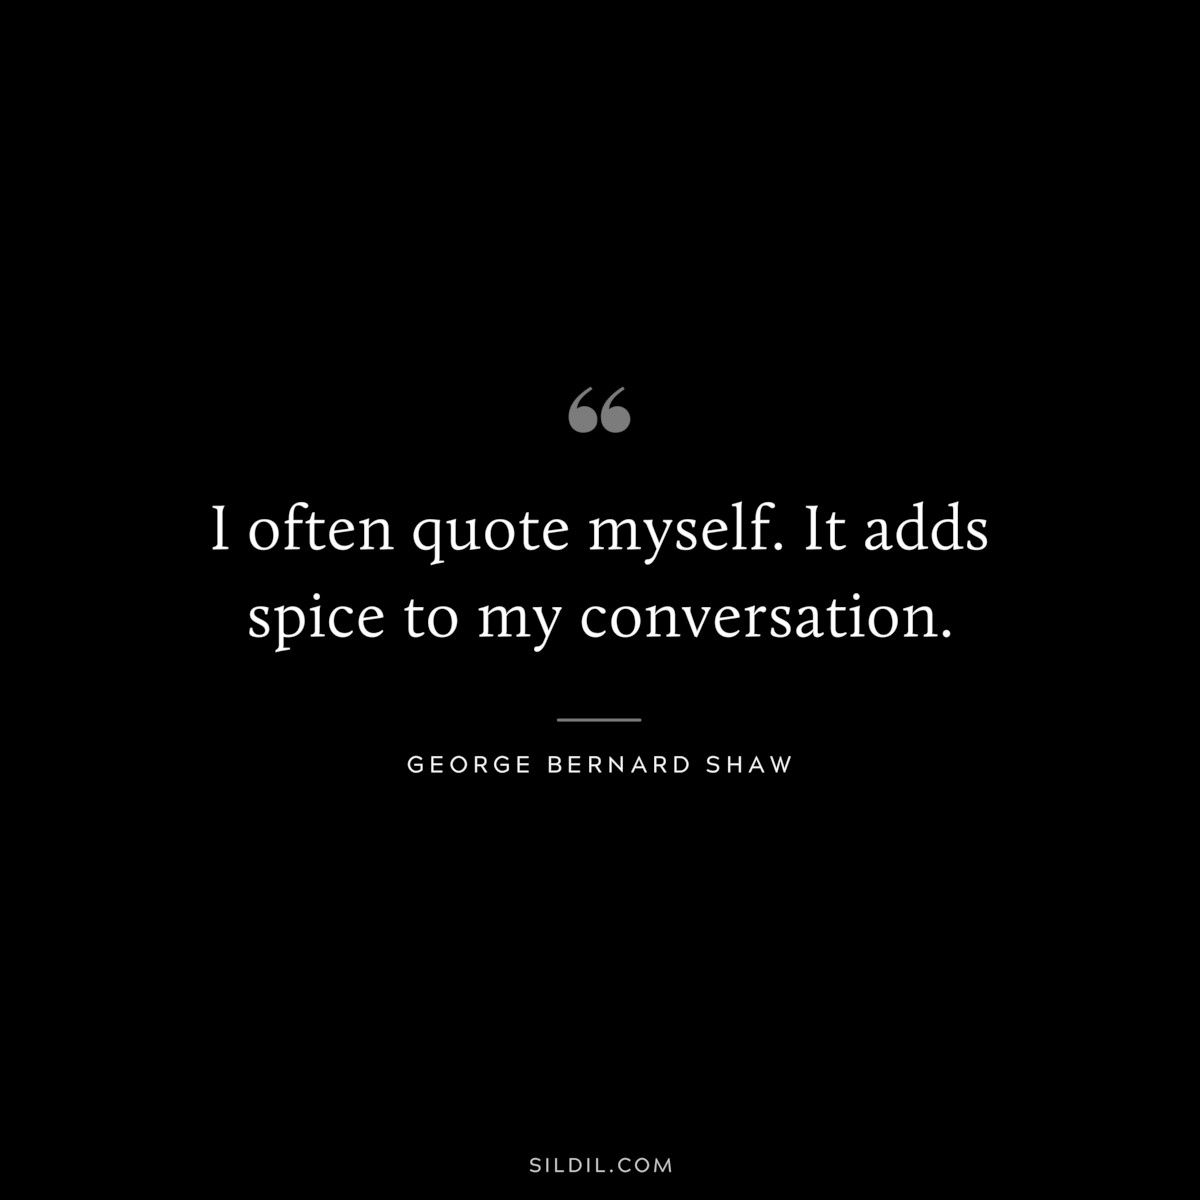 I often quote myself. It adds spice to my conversation. ― George Bernard Shaw